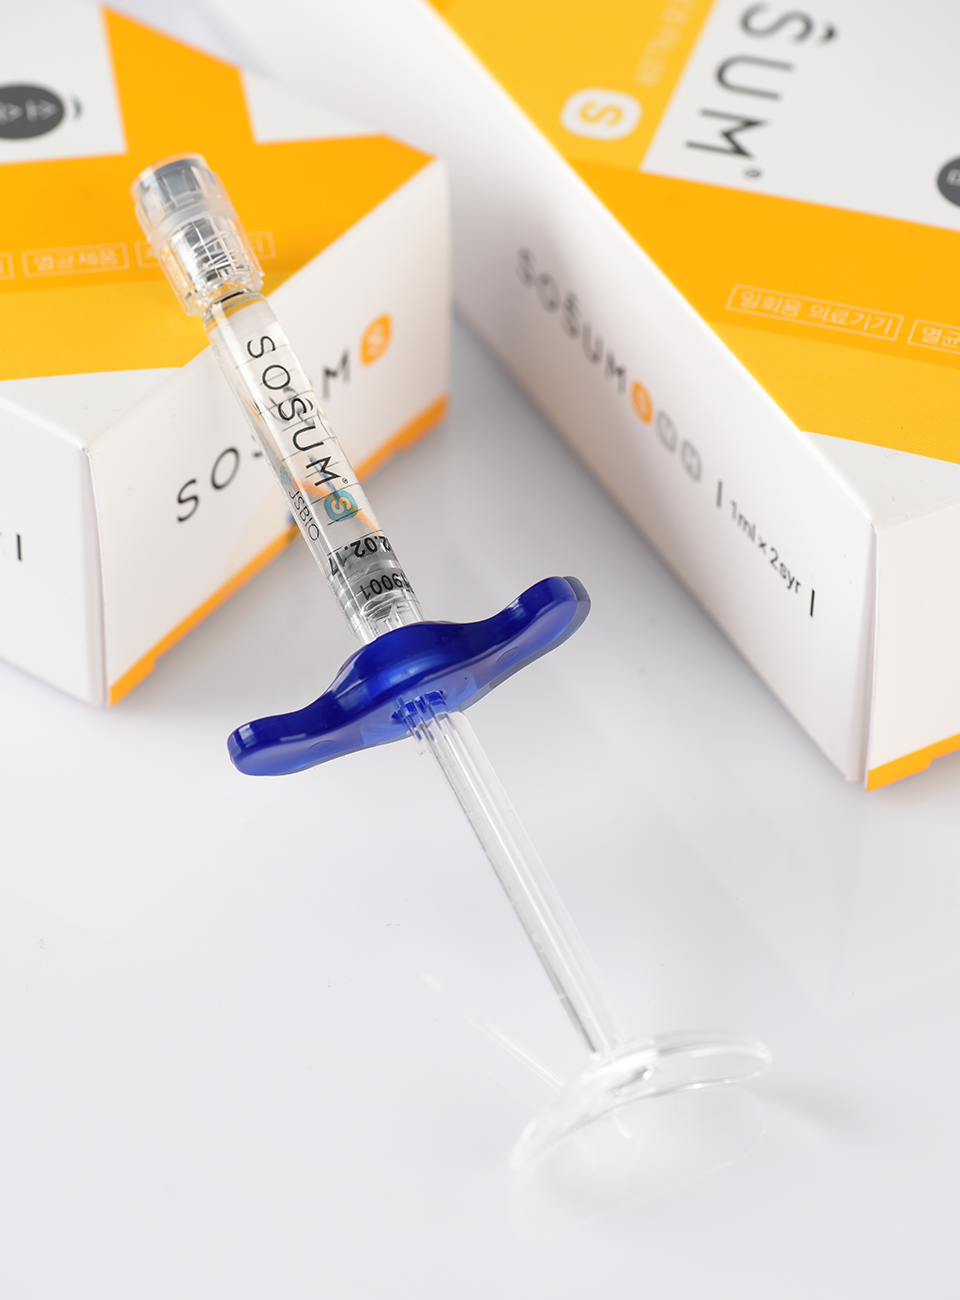 Sosum Dermal Filler S for tackling shallow wrinkles and fine lines, enhancing natural beauty, available at Official Sosum Distributors UAE